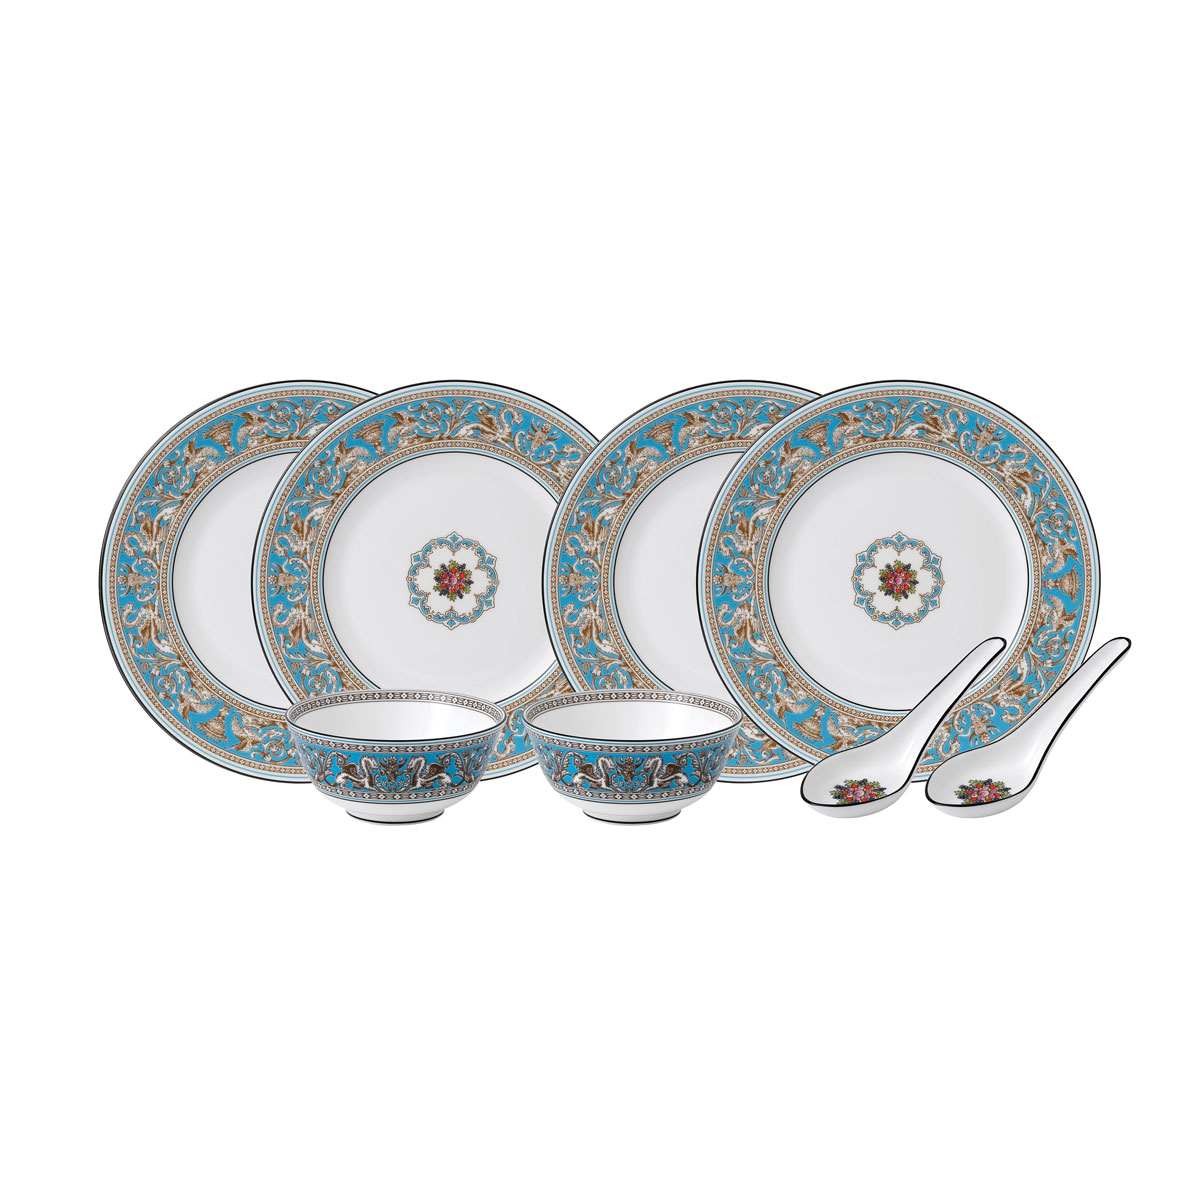 Wedgwood Florentine Turquoise Dining Set For Two With Spoons